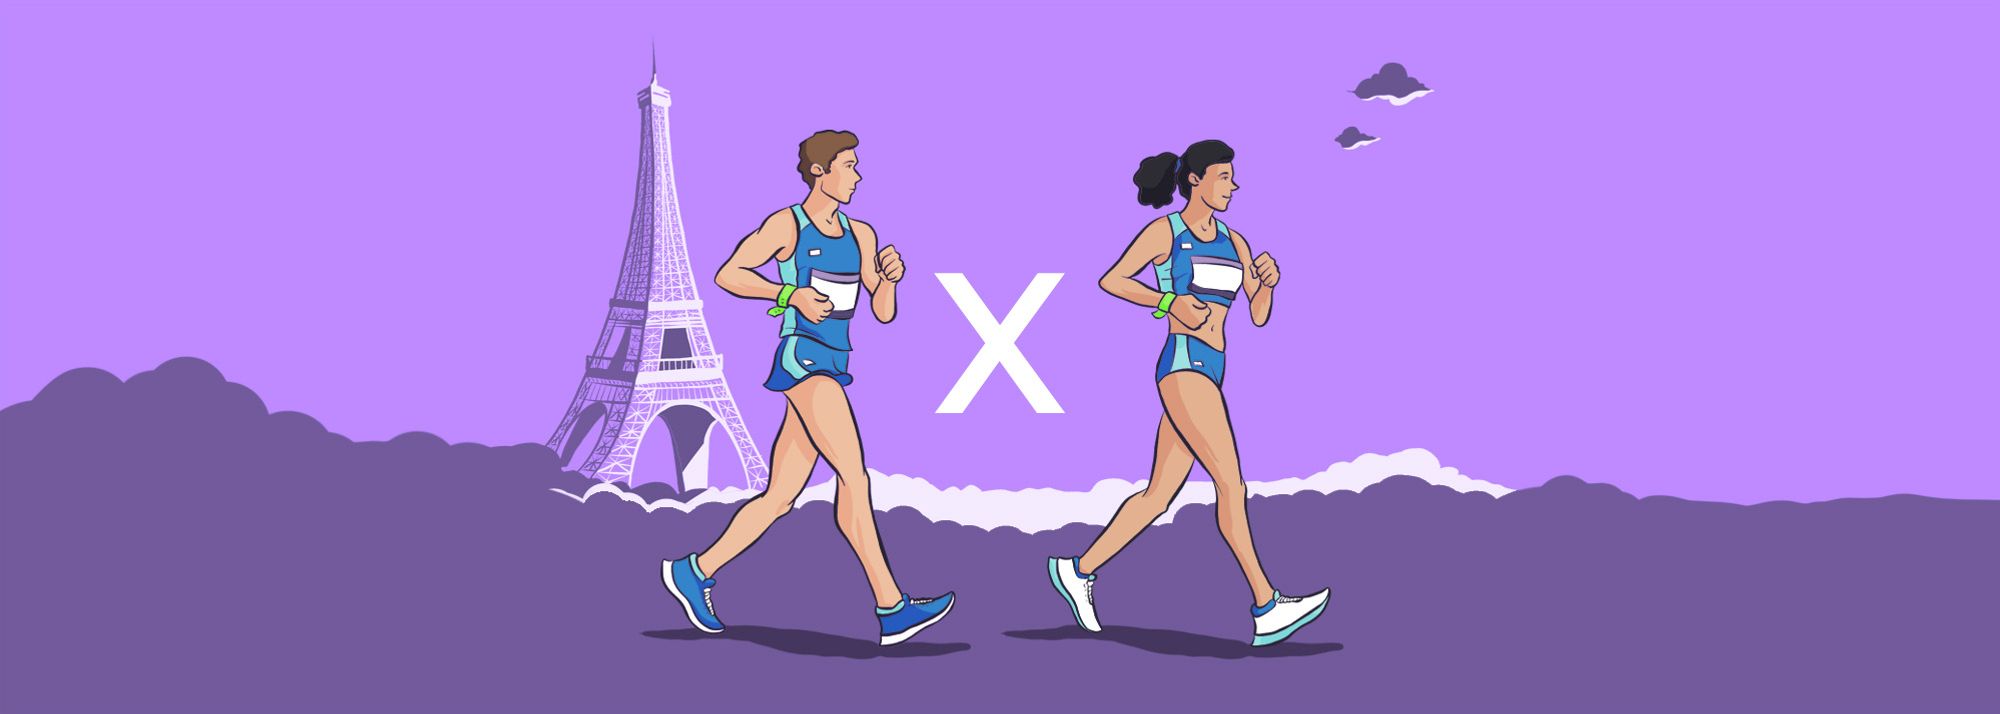 World Athletics and the International Olympic Committee have agreed on the format for the new race walking team event that will make its debut at the Paris 2024 Olympic Games.